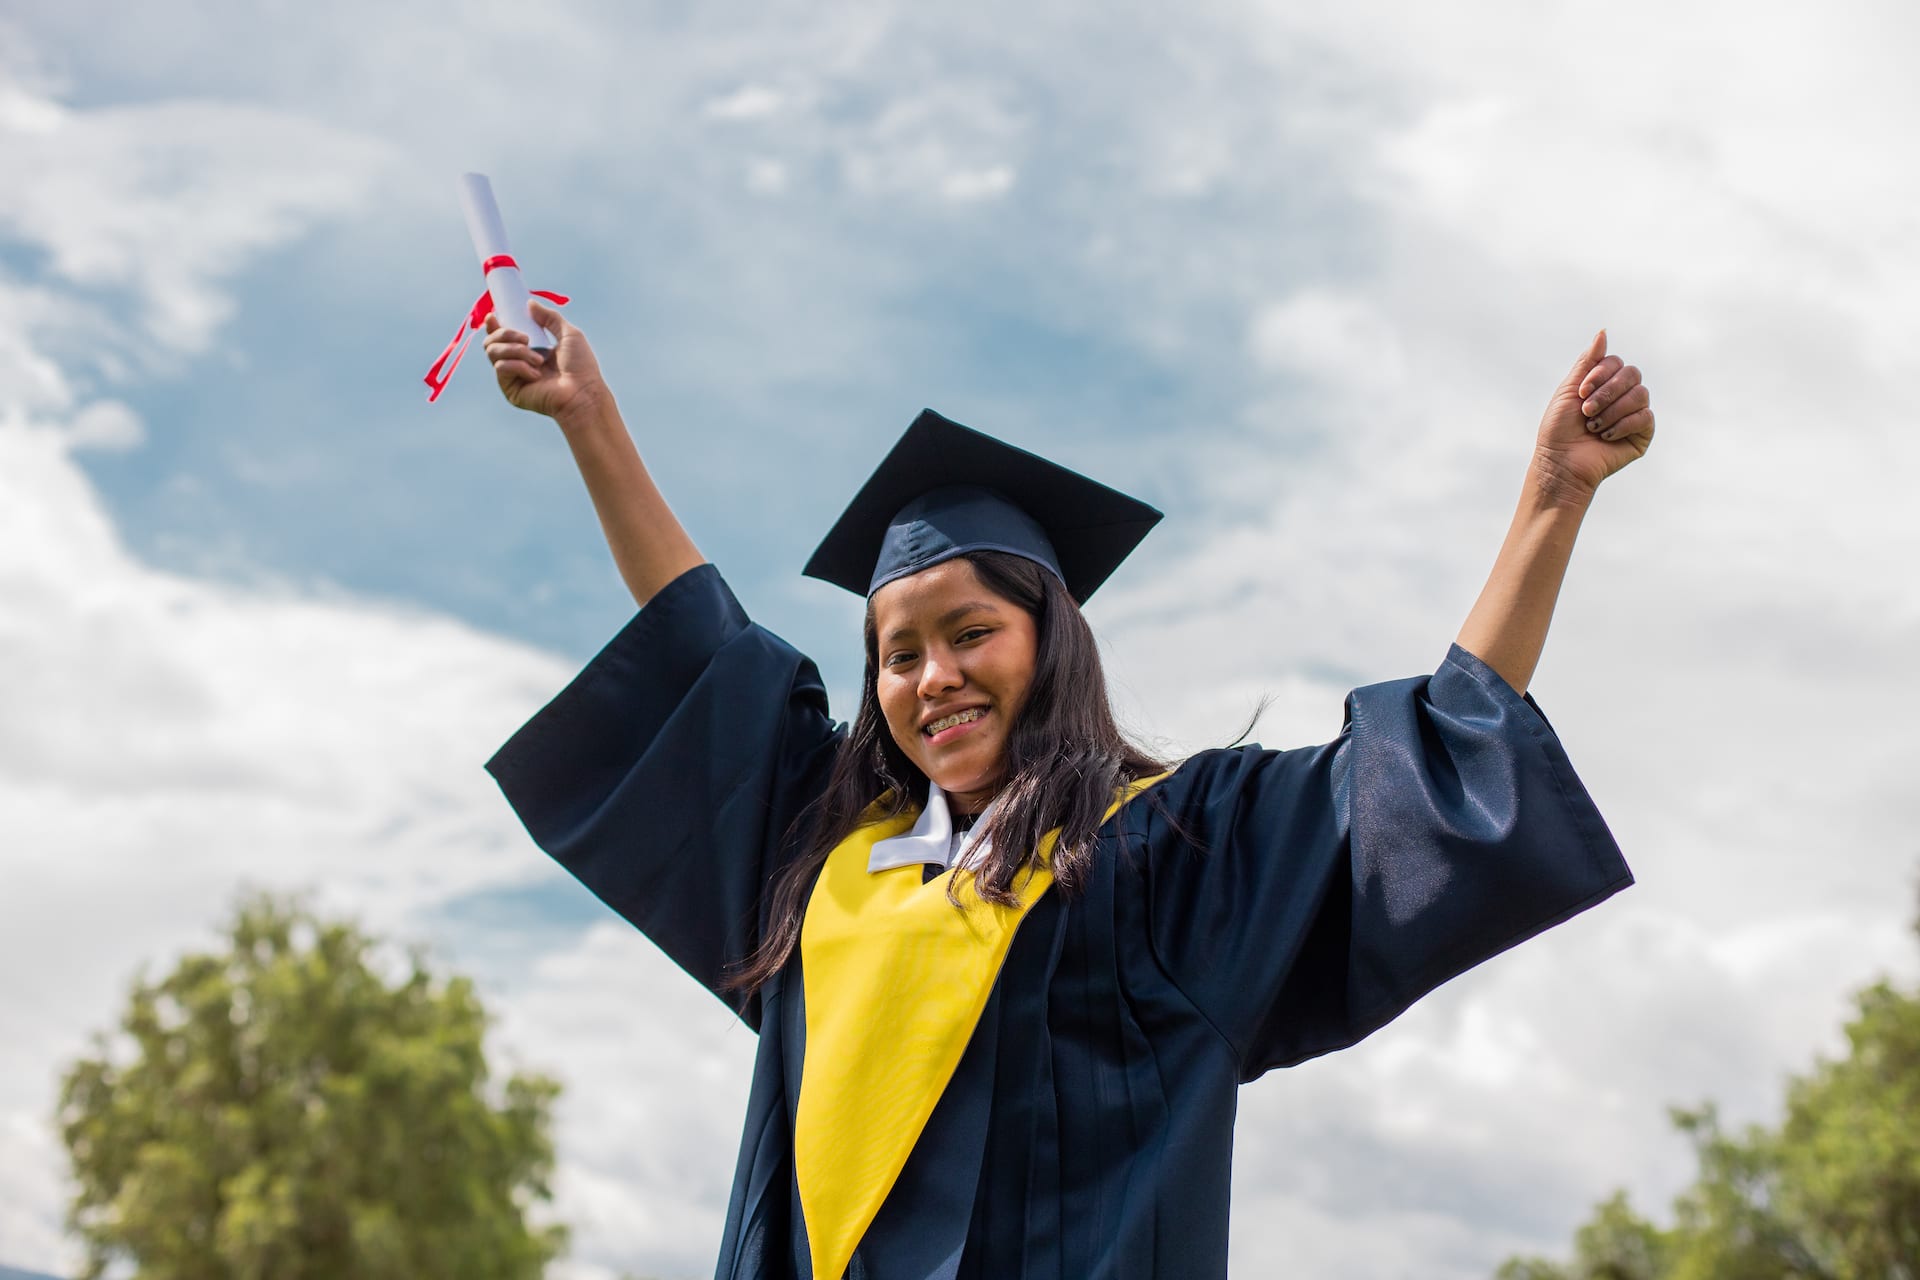 Maribel is wearing her graduation uniform, a black cap and gown, and a yellow collar. She is standing outside with her arms up in the air. In one hand is her diploma.